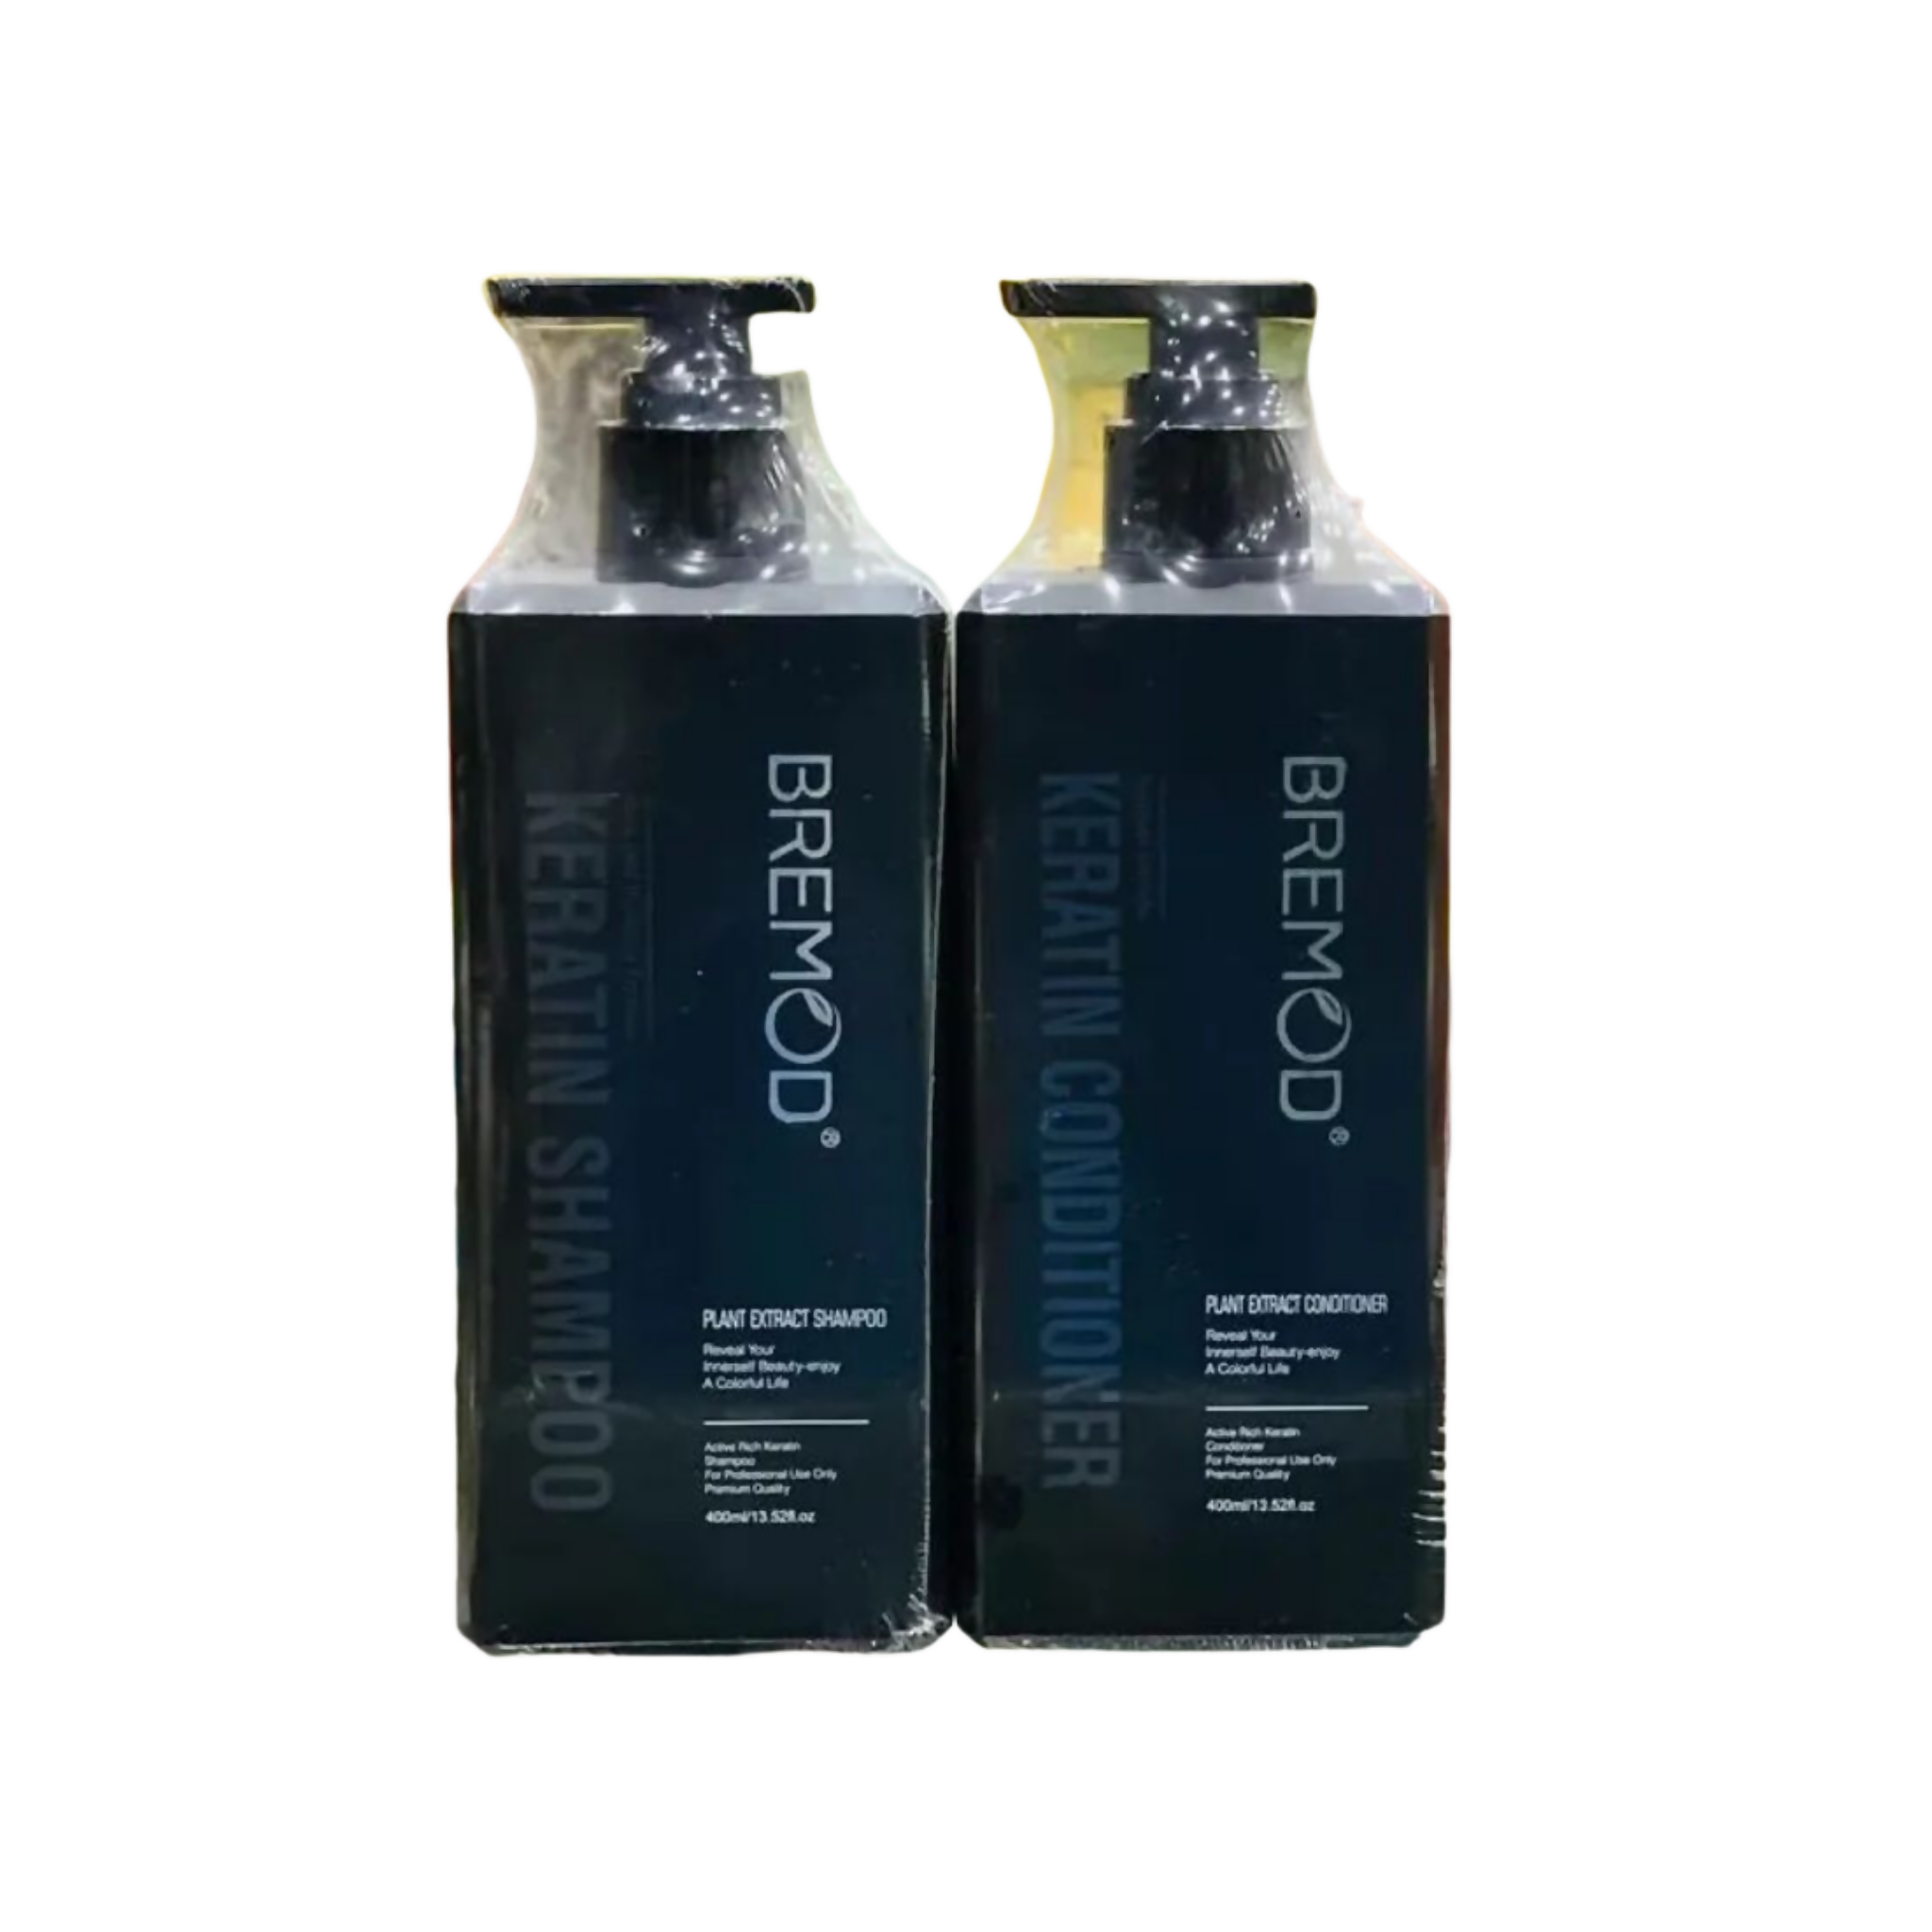 Bremod Shampoo & Conditioner, Nourish and Enhance Your Hair